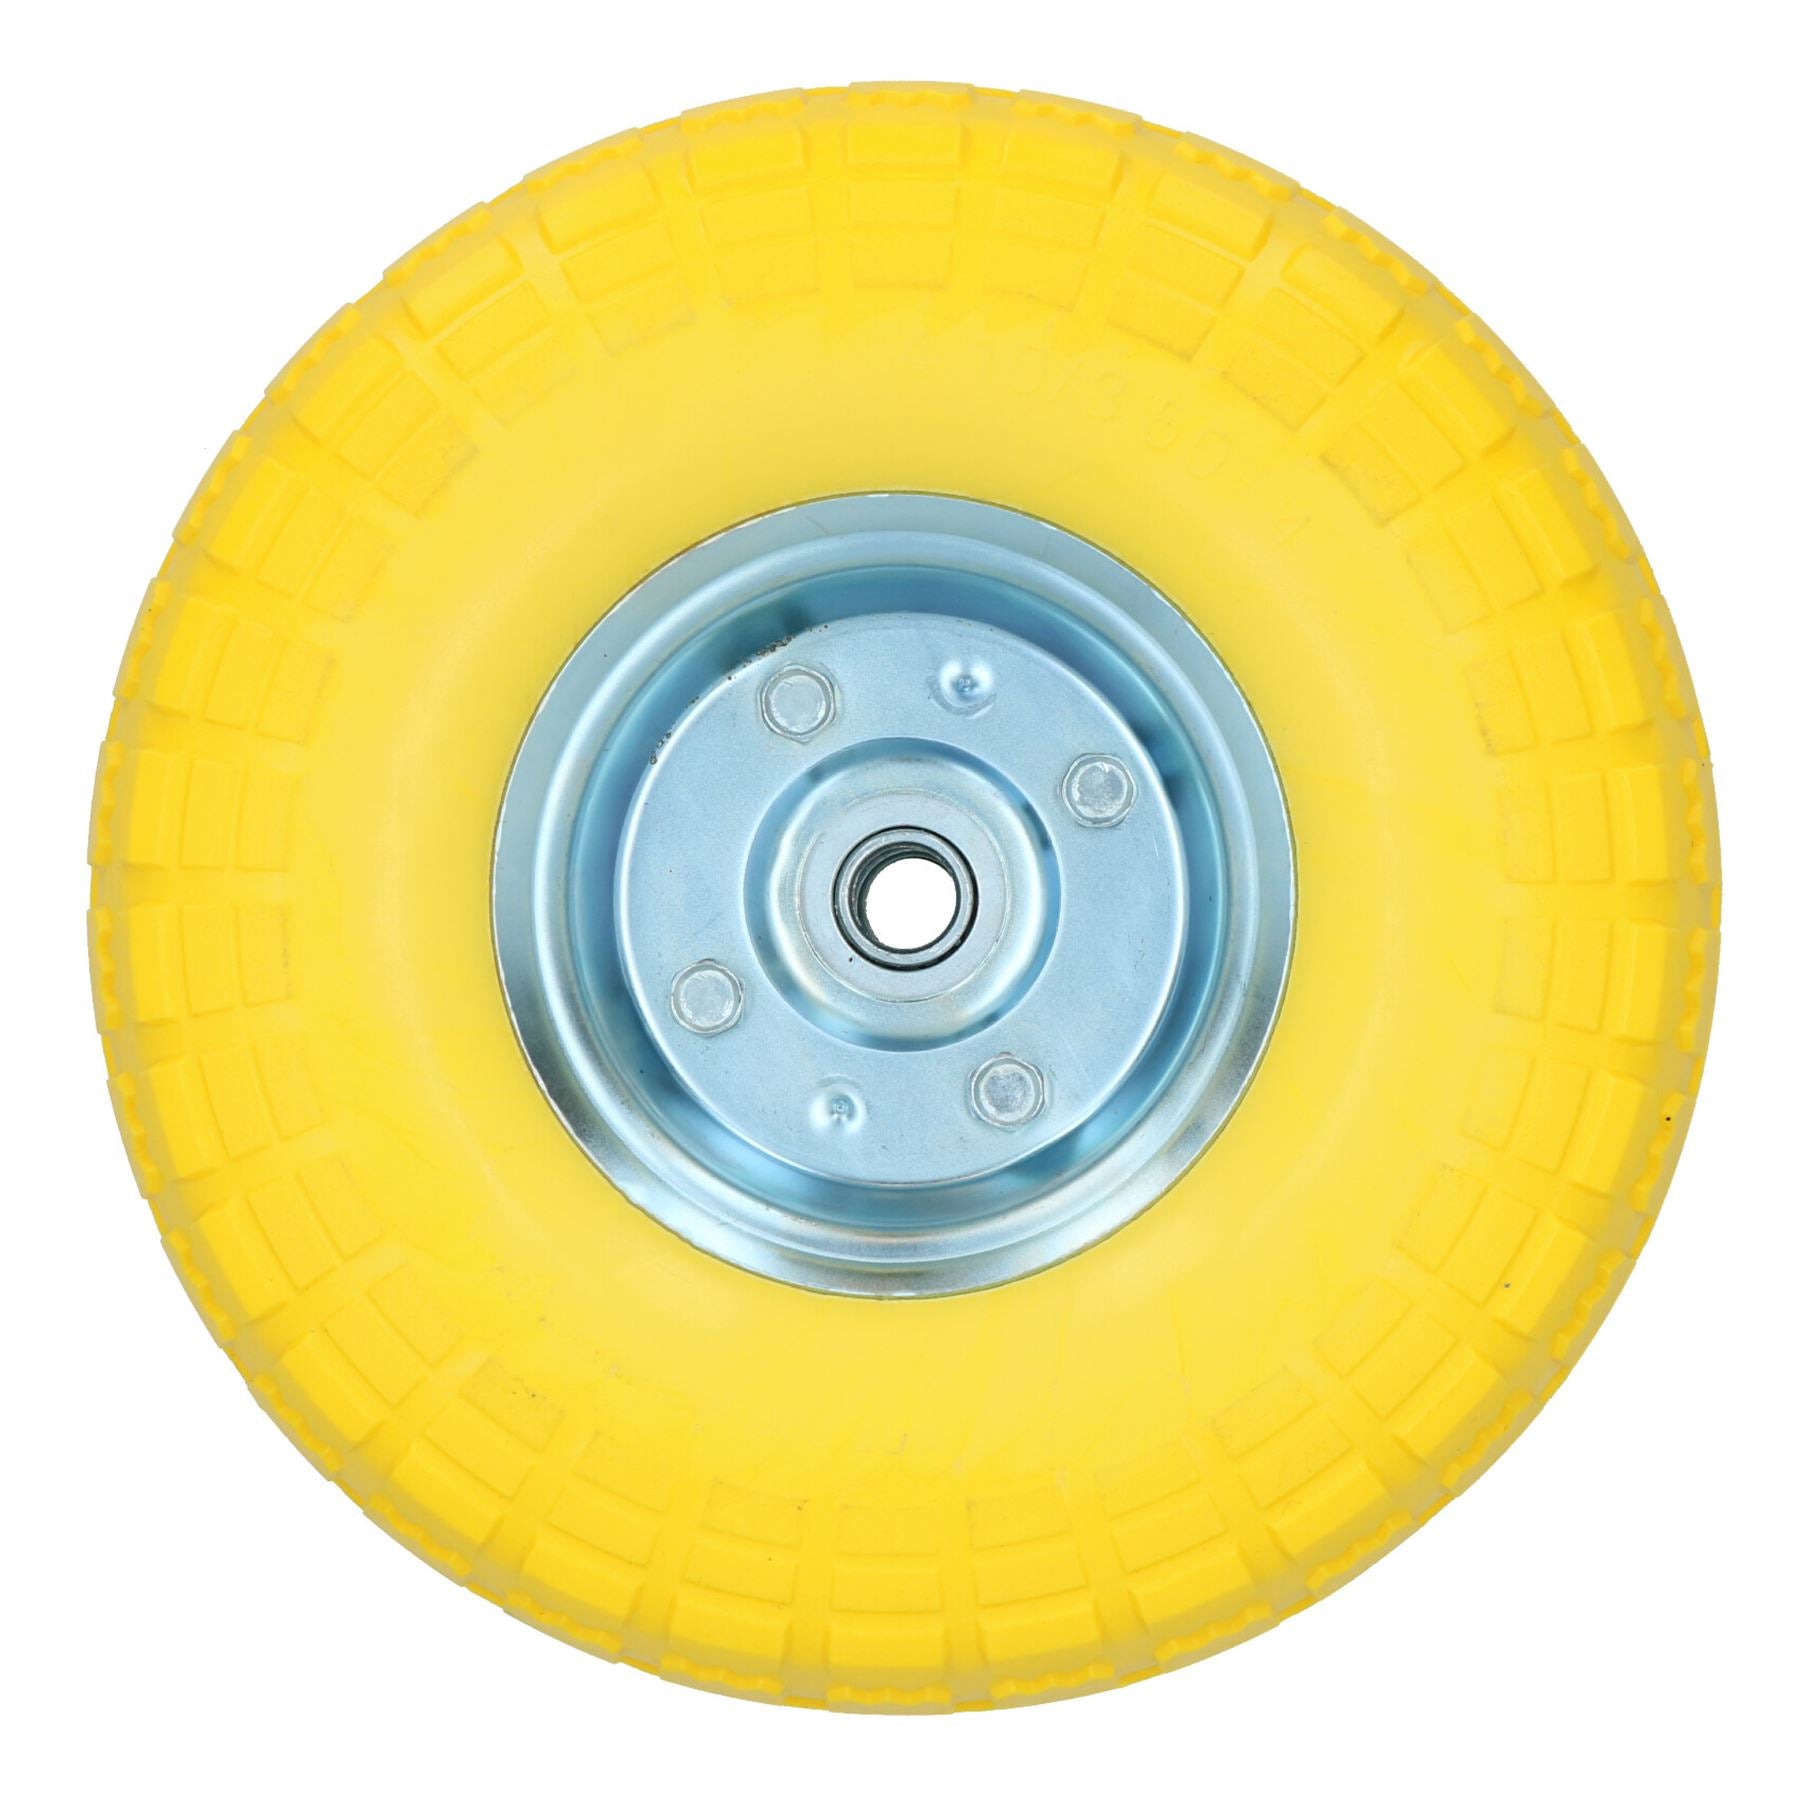 10 Inch Puncture Proof Sack Truck Cart Trolley Wheel 16mm Bore 150kg